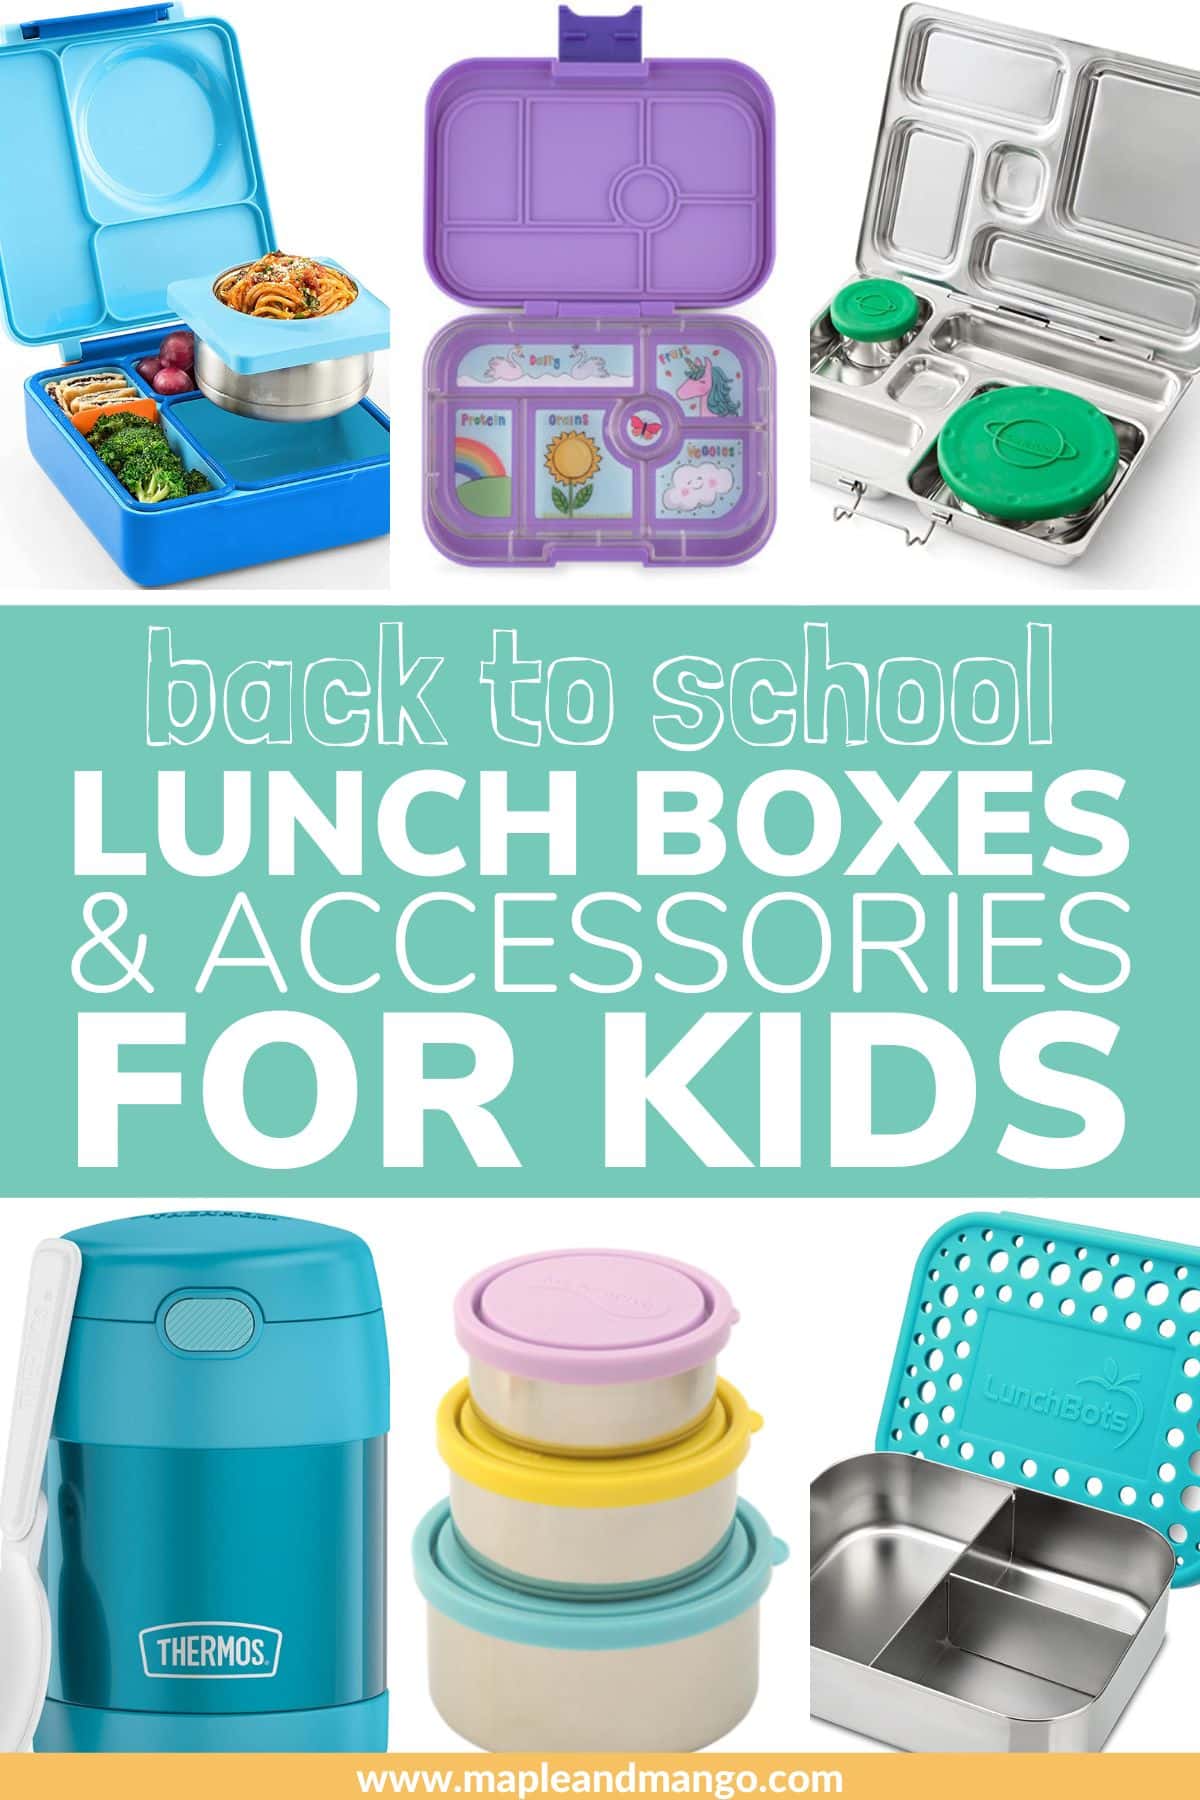 Pinterest collage graphic of lunch gear for kids with text overlay "Back To School Lunch Boxes & Accessories For Kids".